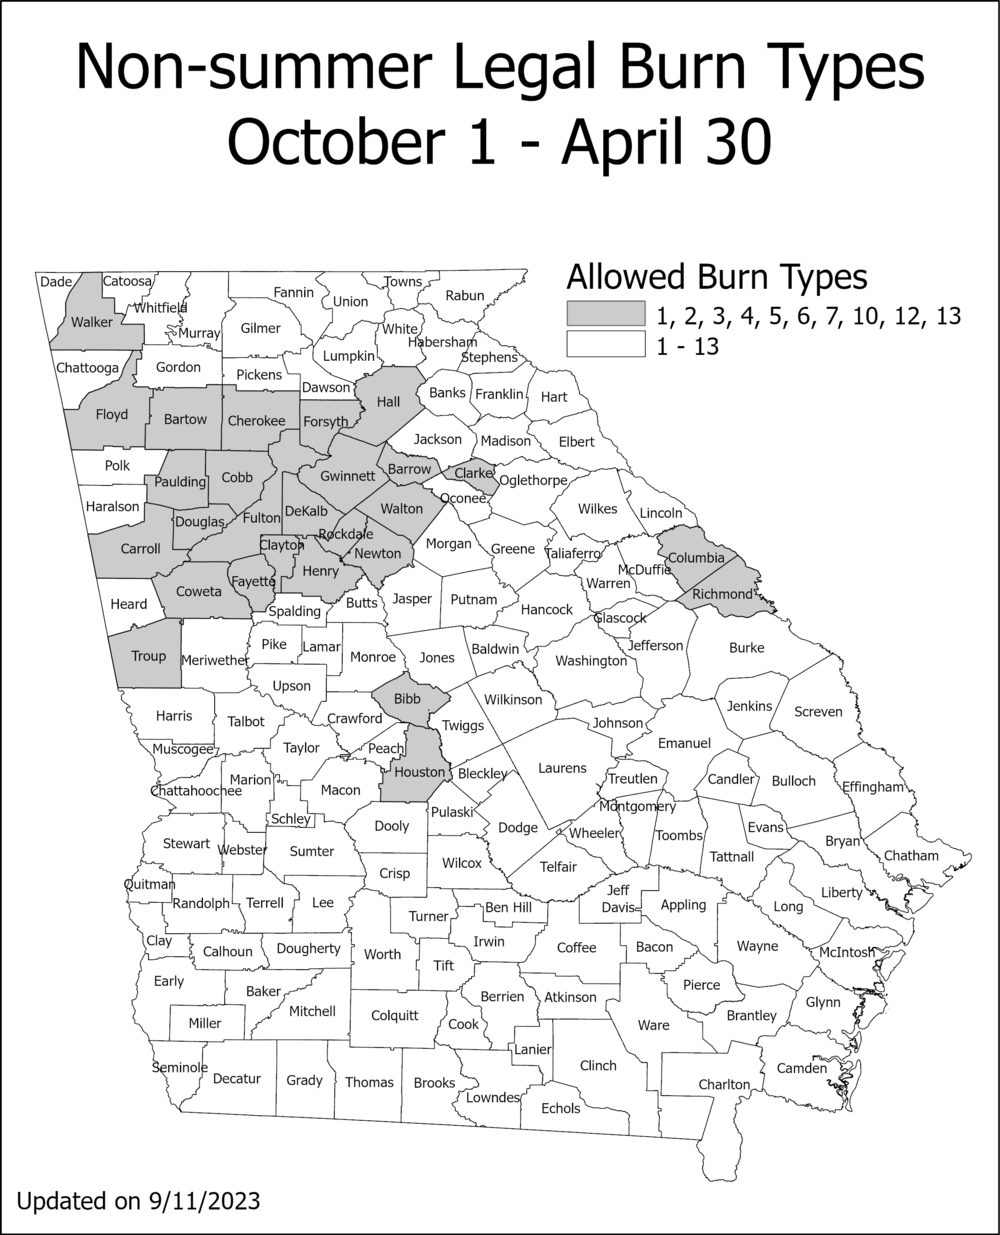 A Map of Georgia highlighting non-summer burn types by county